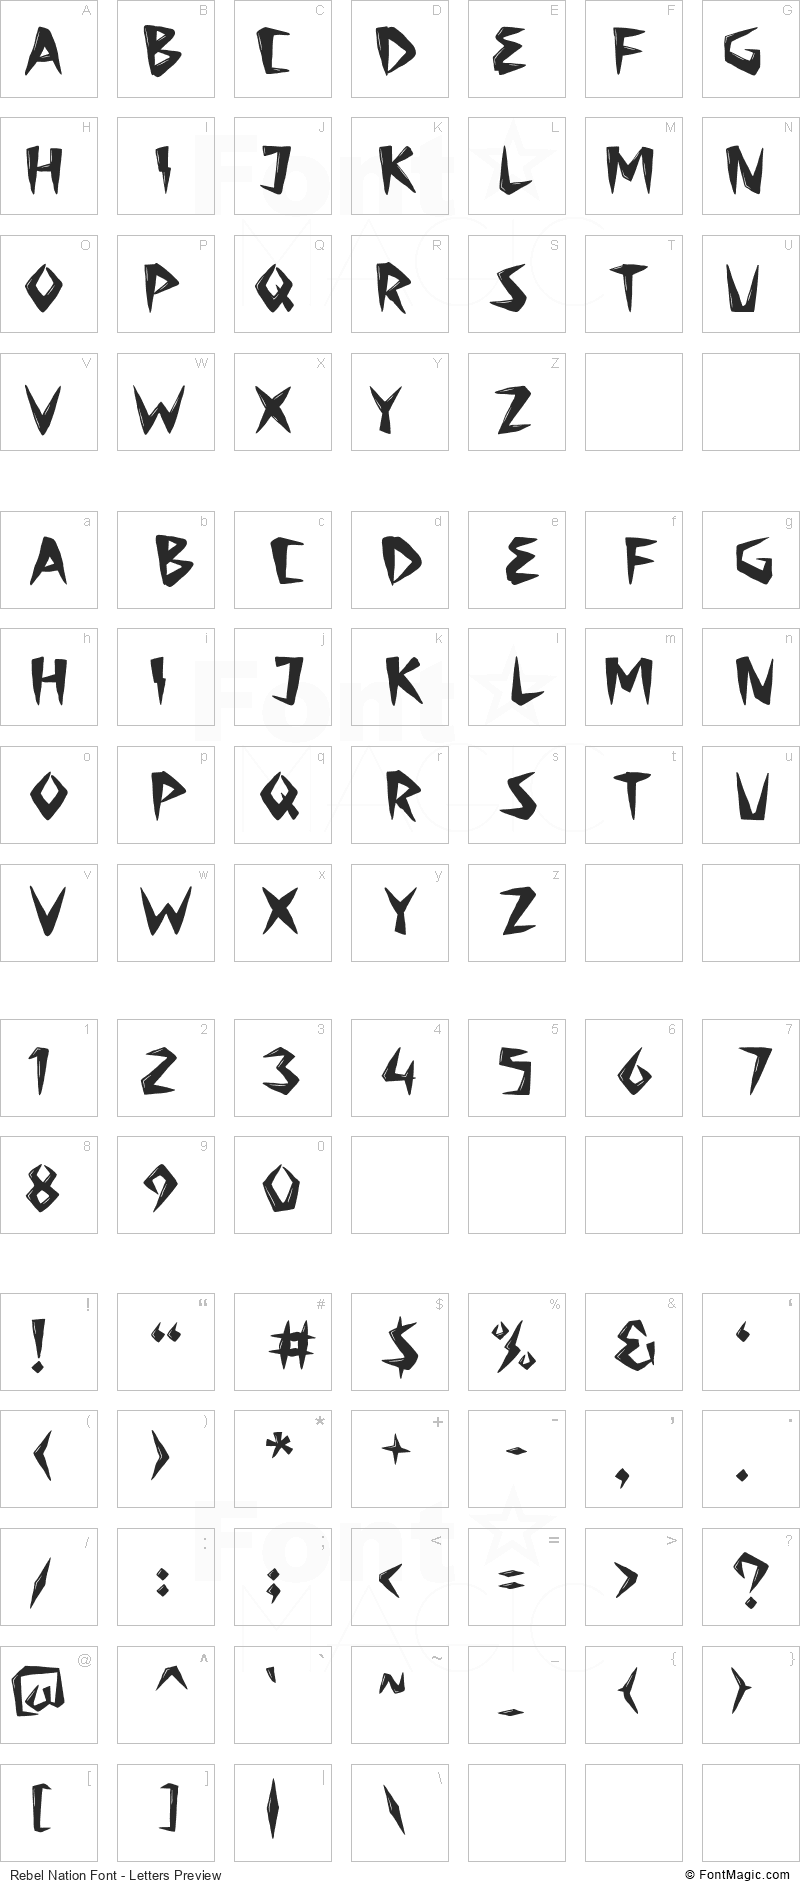 Rebel Nation Font - All Latters Preview Chart